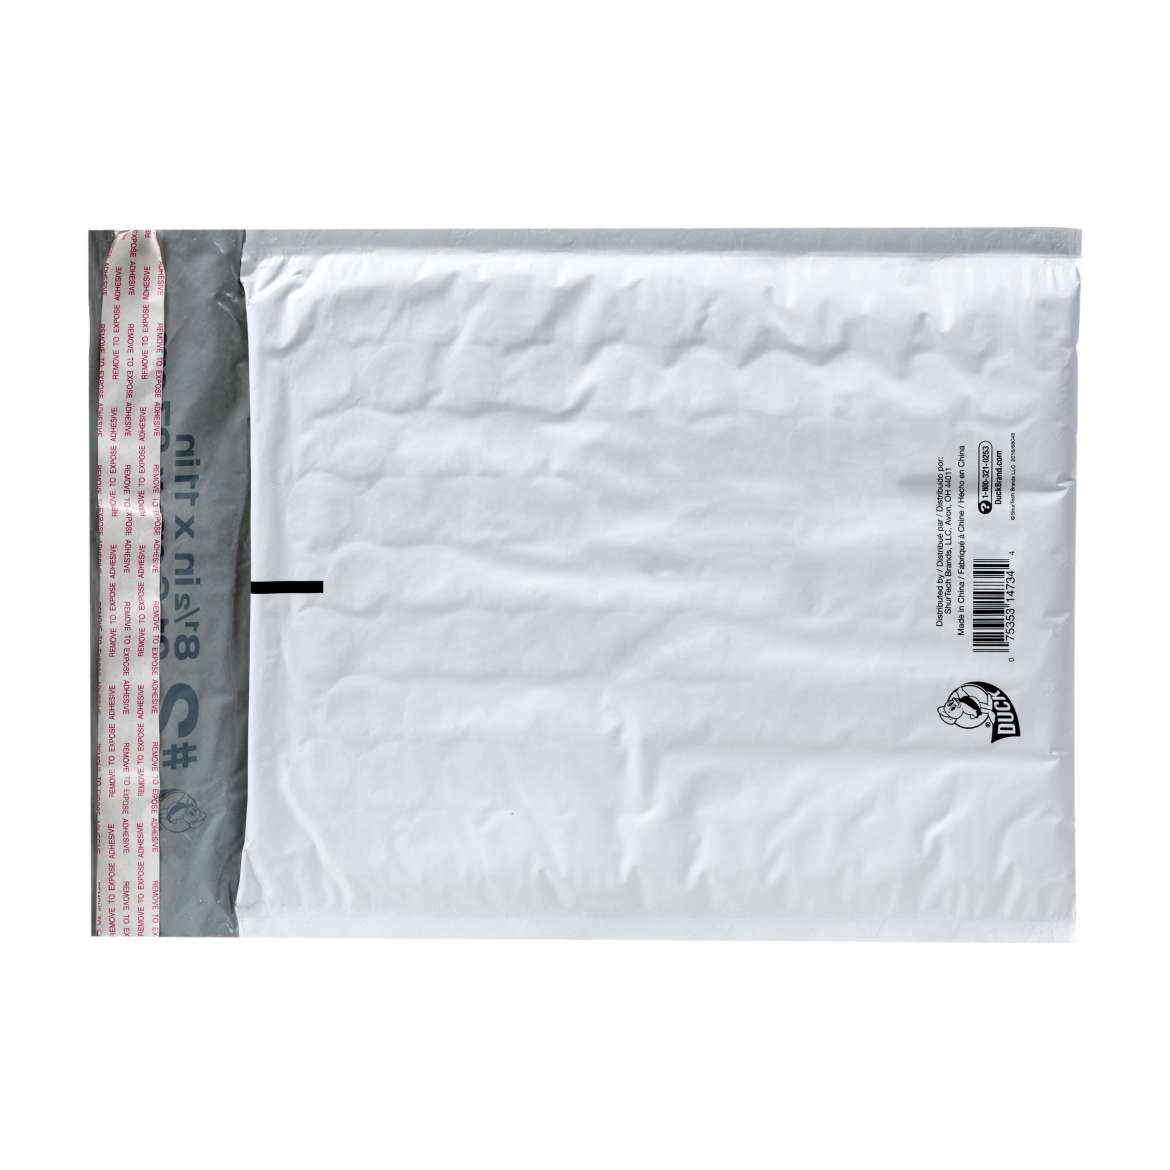 Poly Big Bubble Mailers